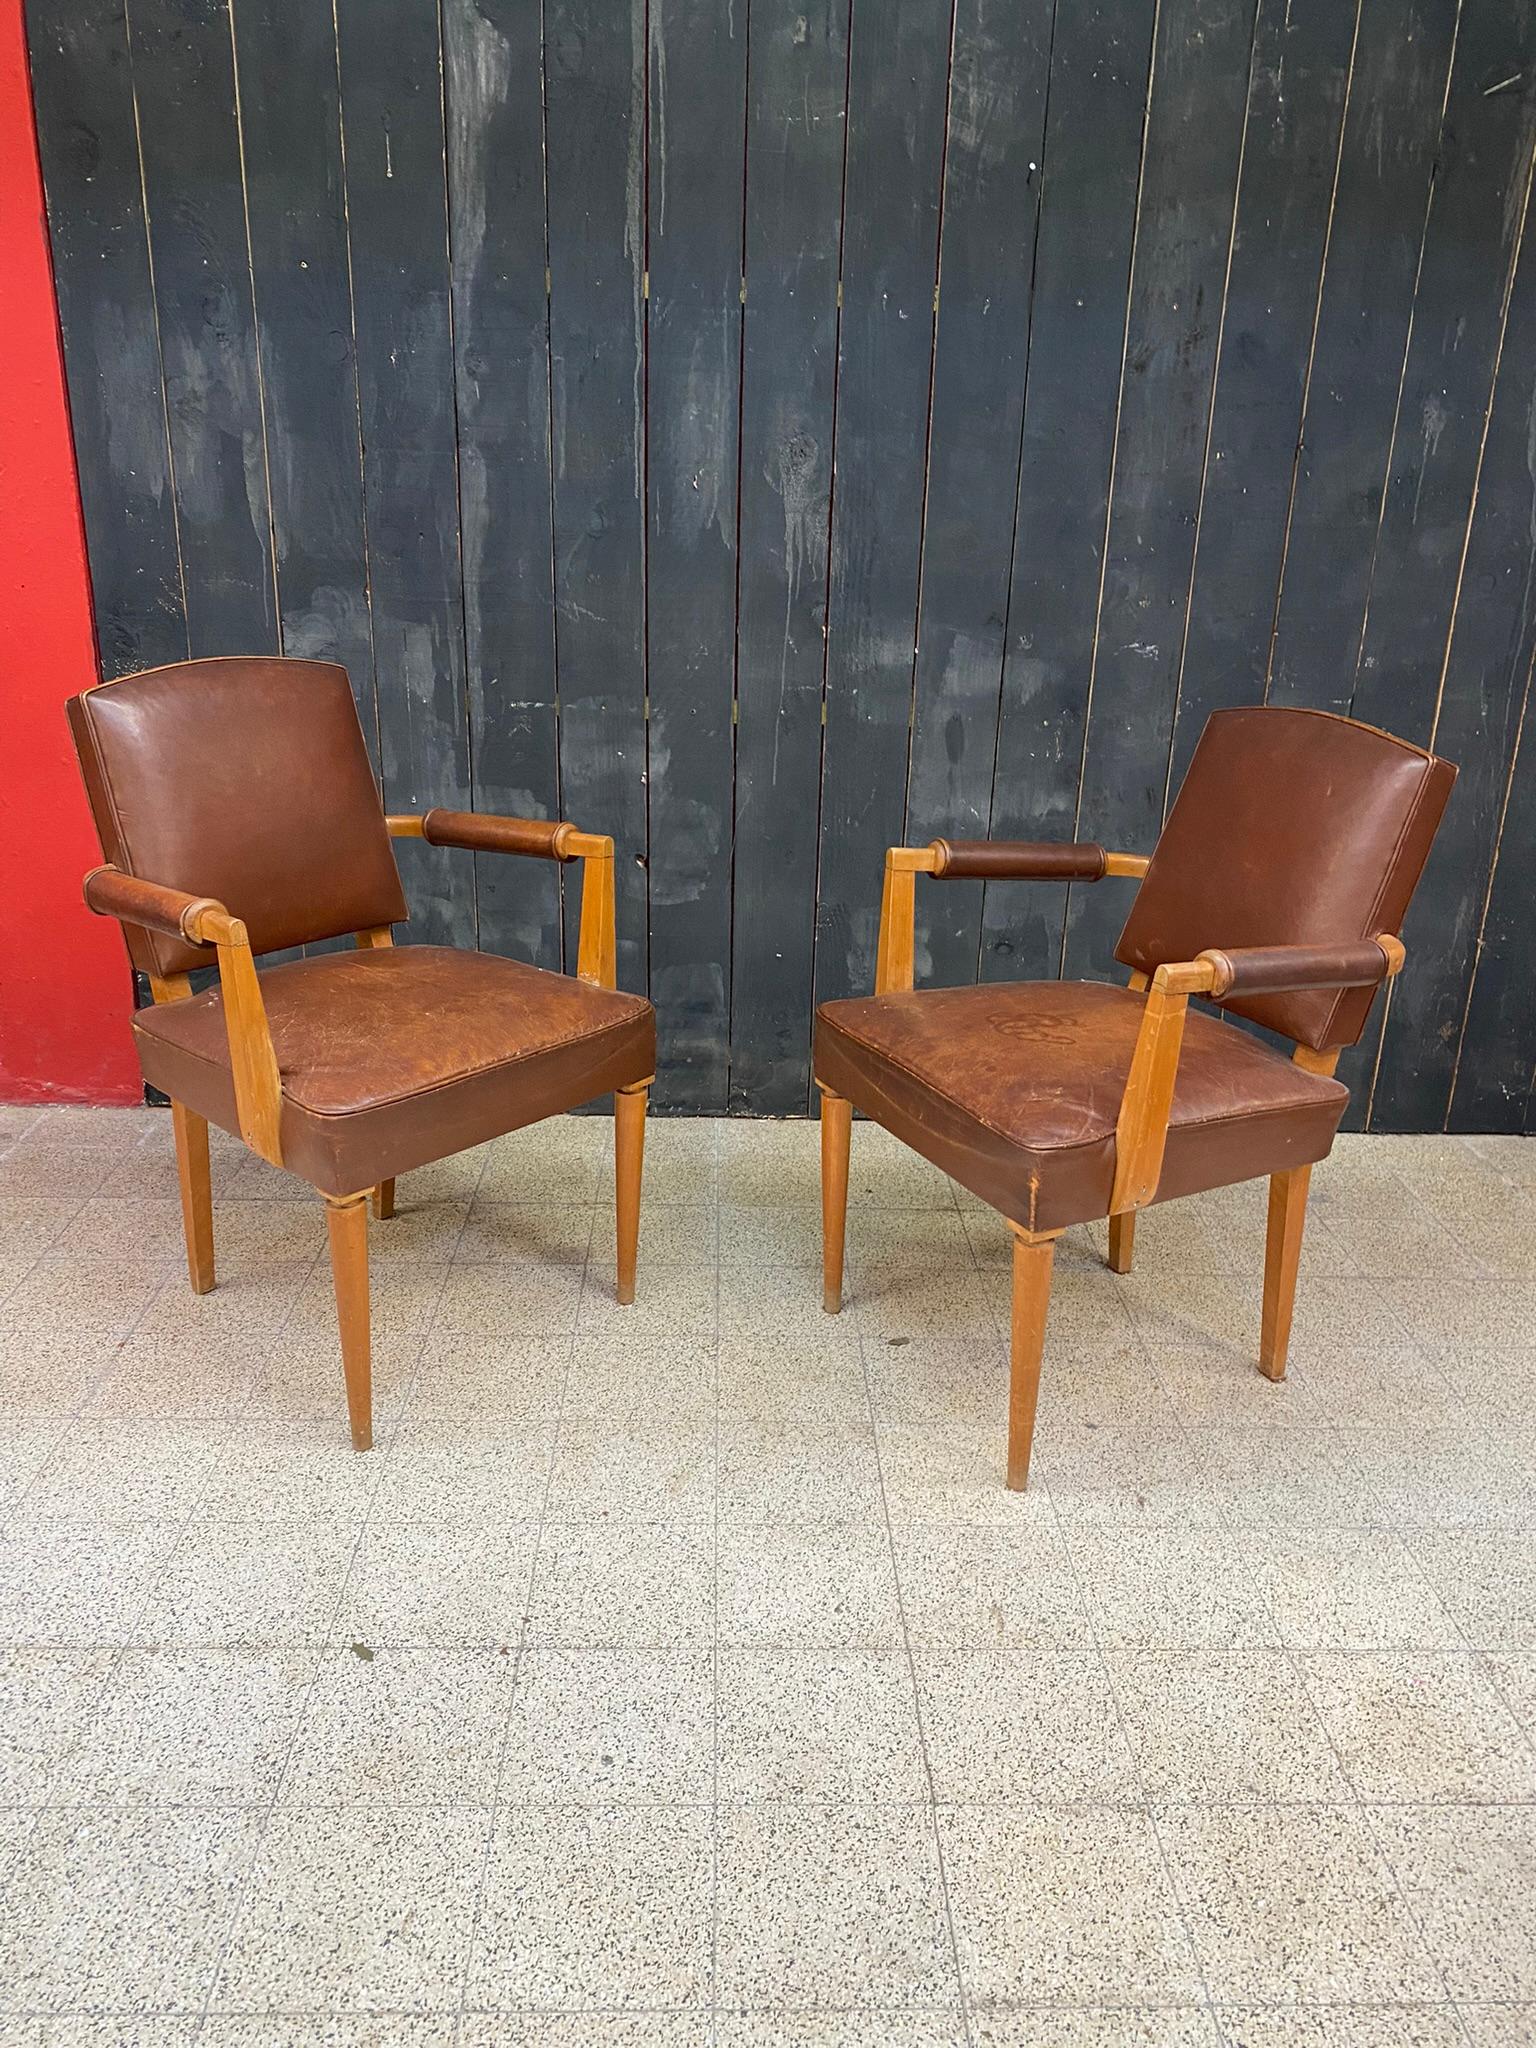 3 art deco armchairs covered in leather, circa 1930
the leather is stained but not torn, very correct general condition, beautiful patina;
the price is for 1 , the buyer can buy 1 , 2 or 3 armchairs